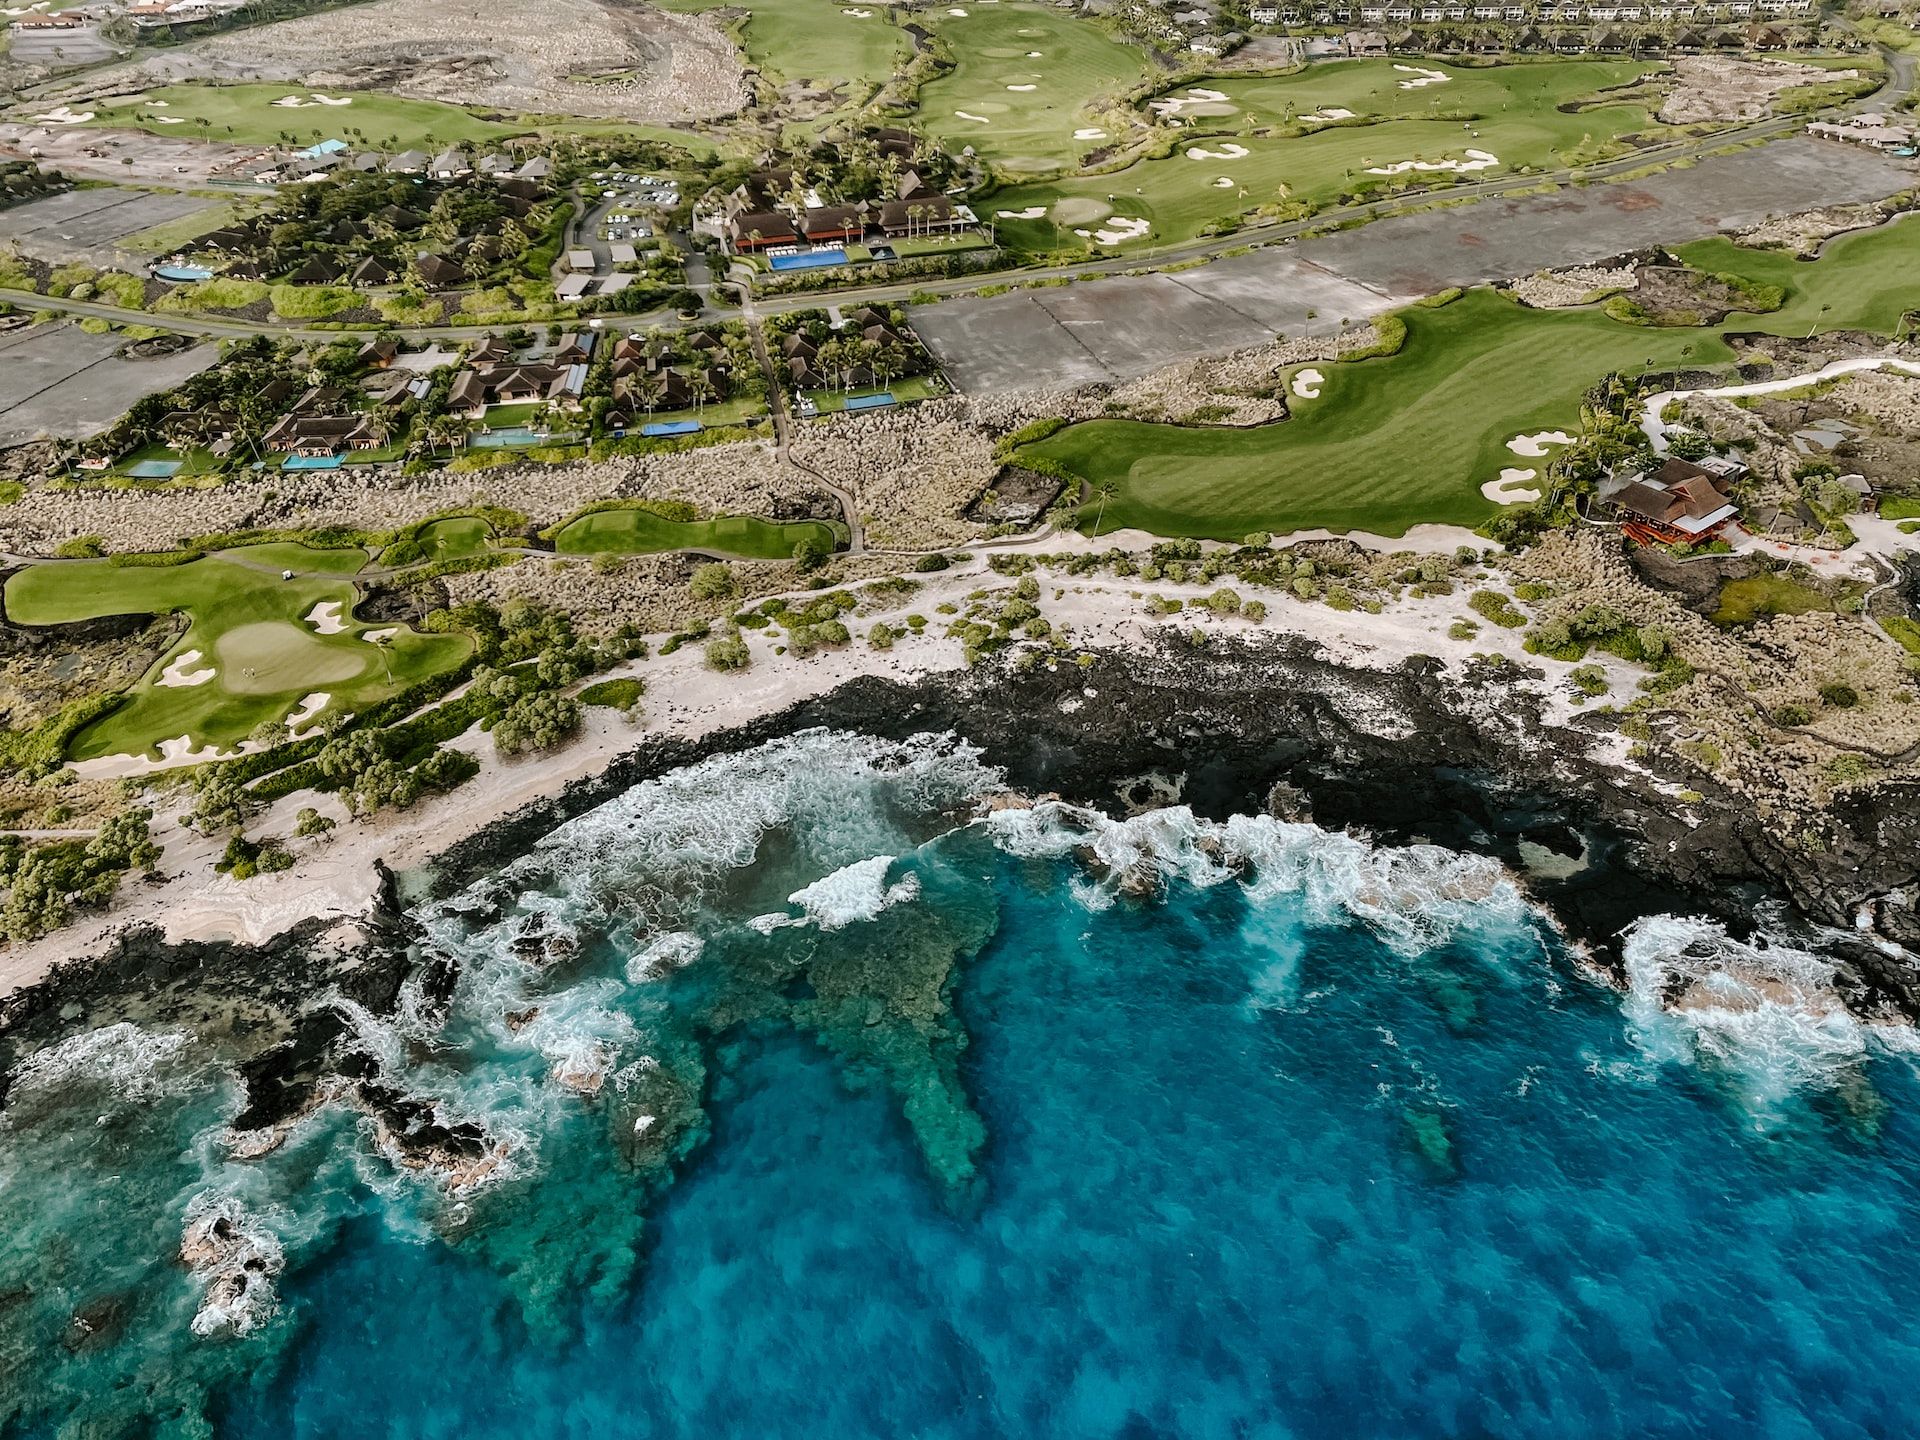 A view from above Kona, Hawaii.